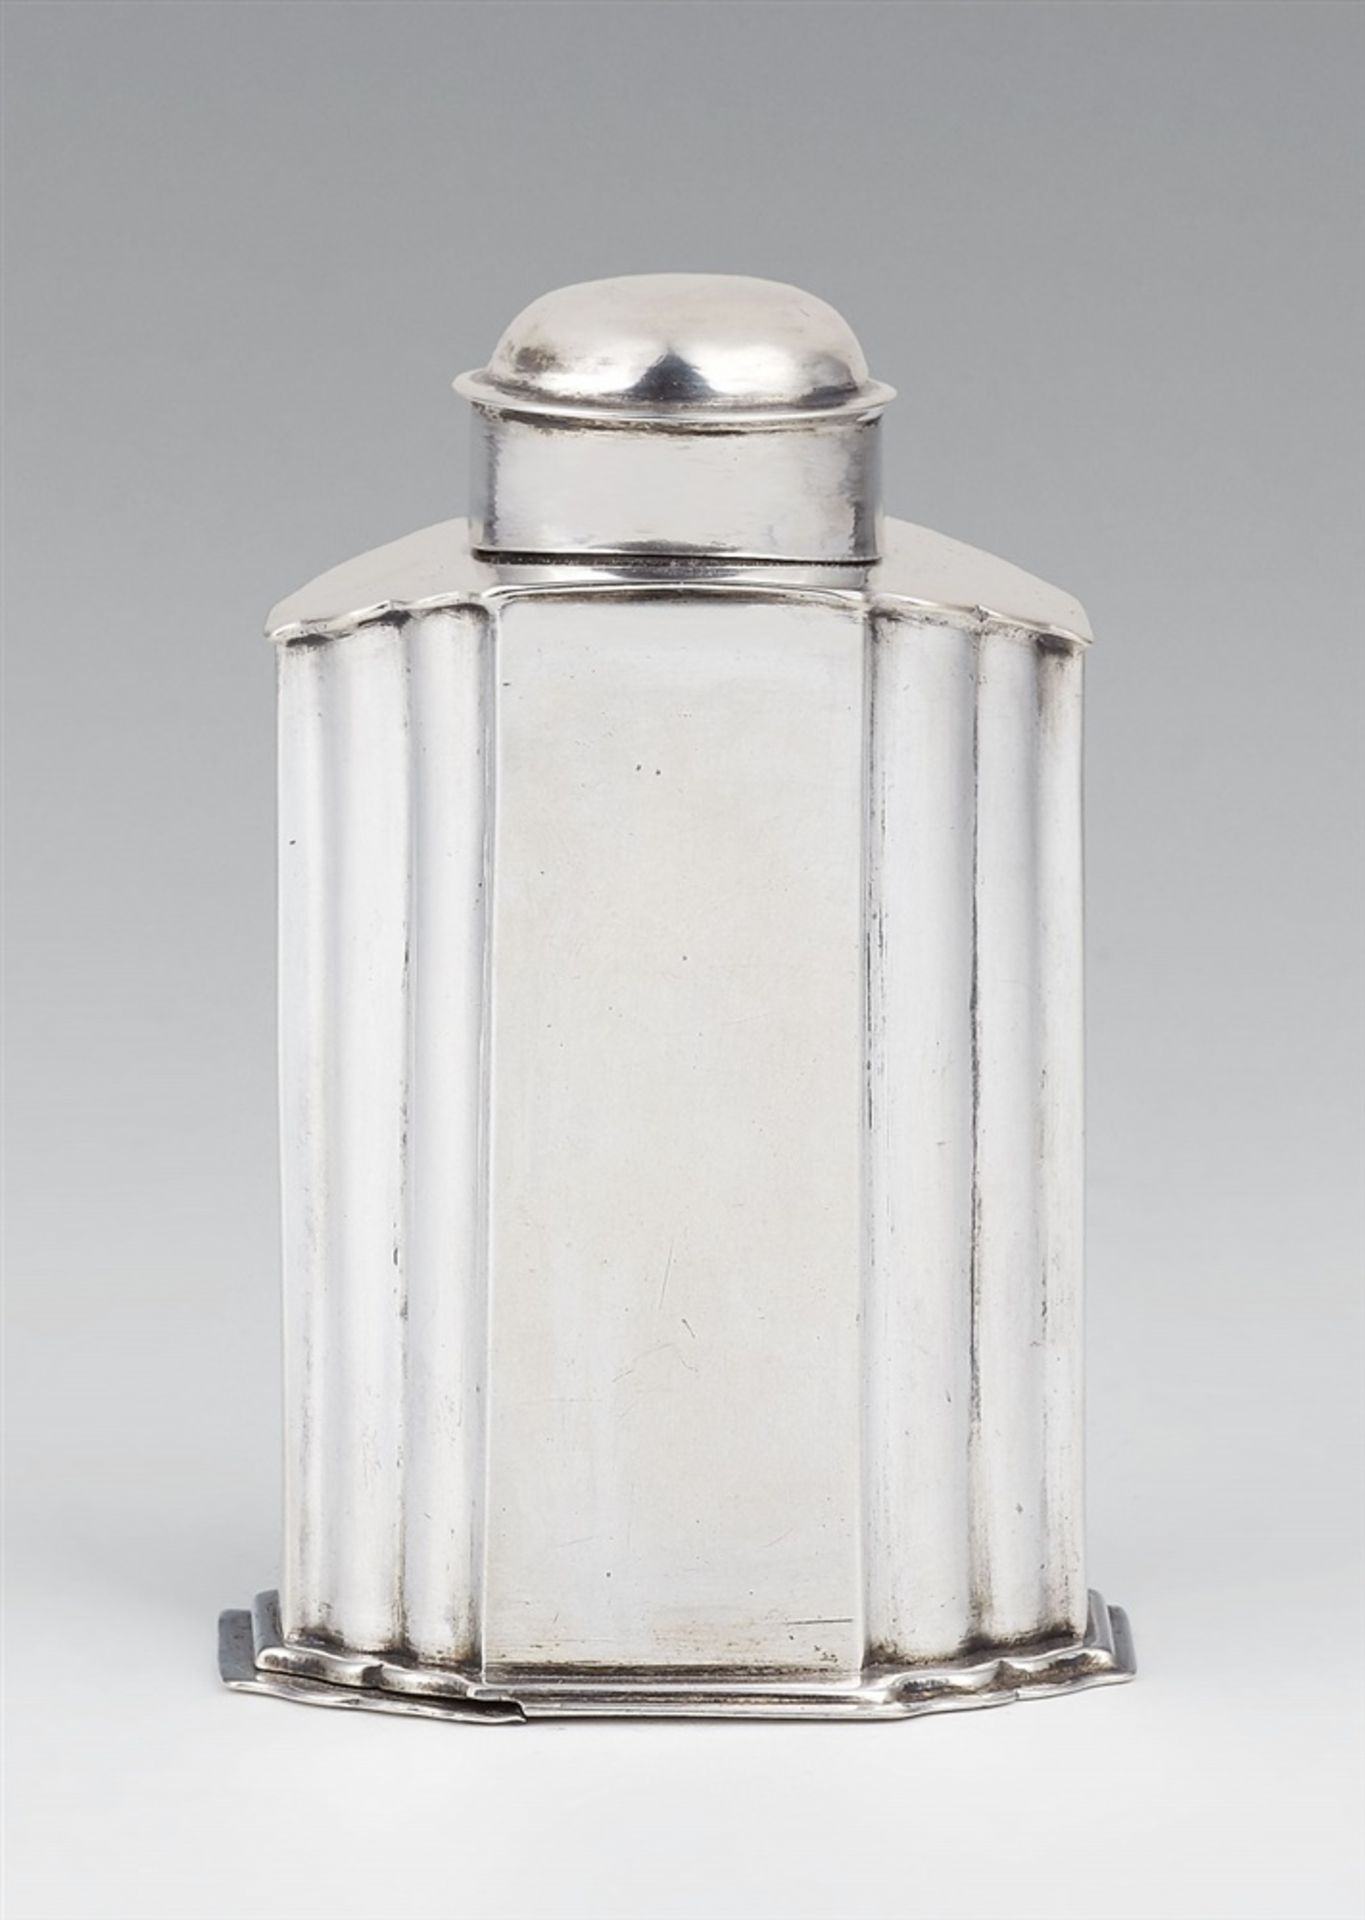 An Augsburg silver tea caddySilver Rectangular caddy with a sliding lock in the underside and a slip